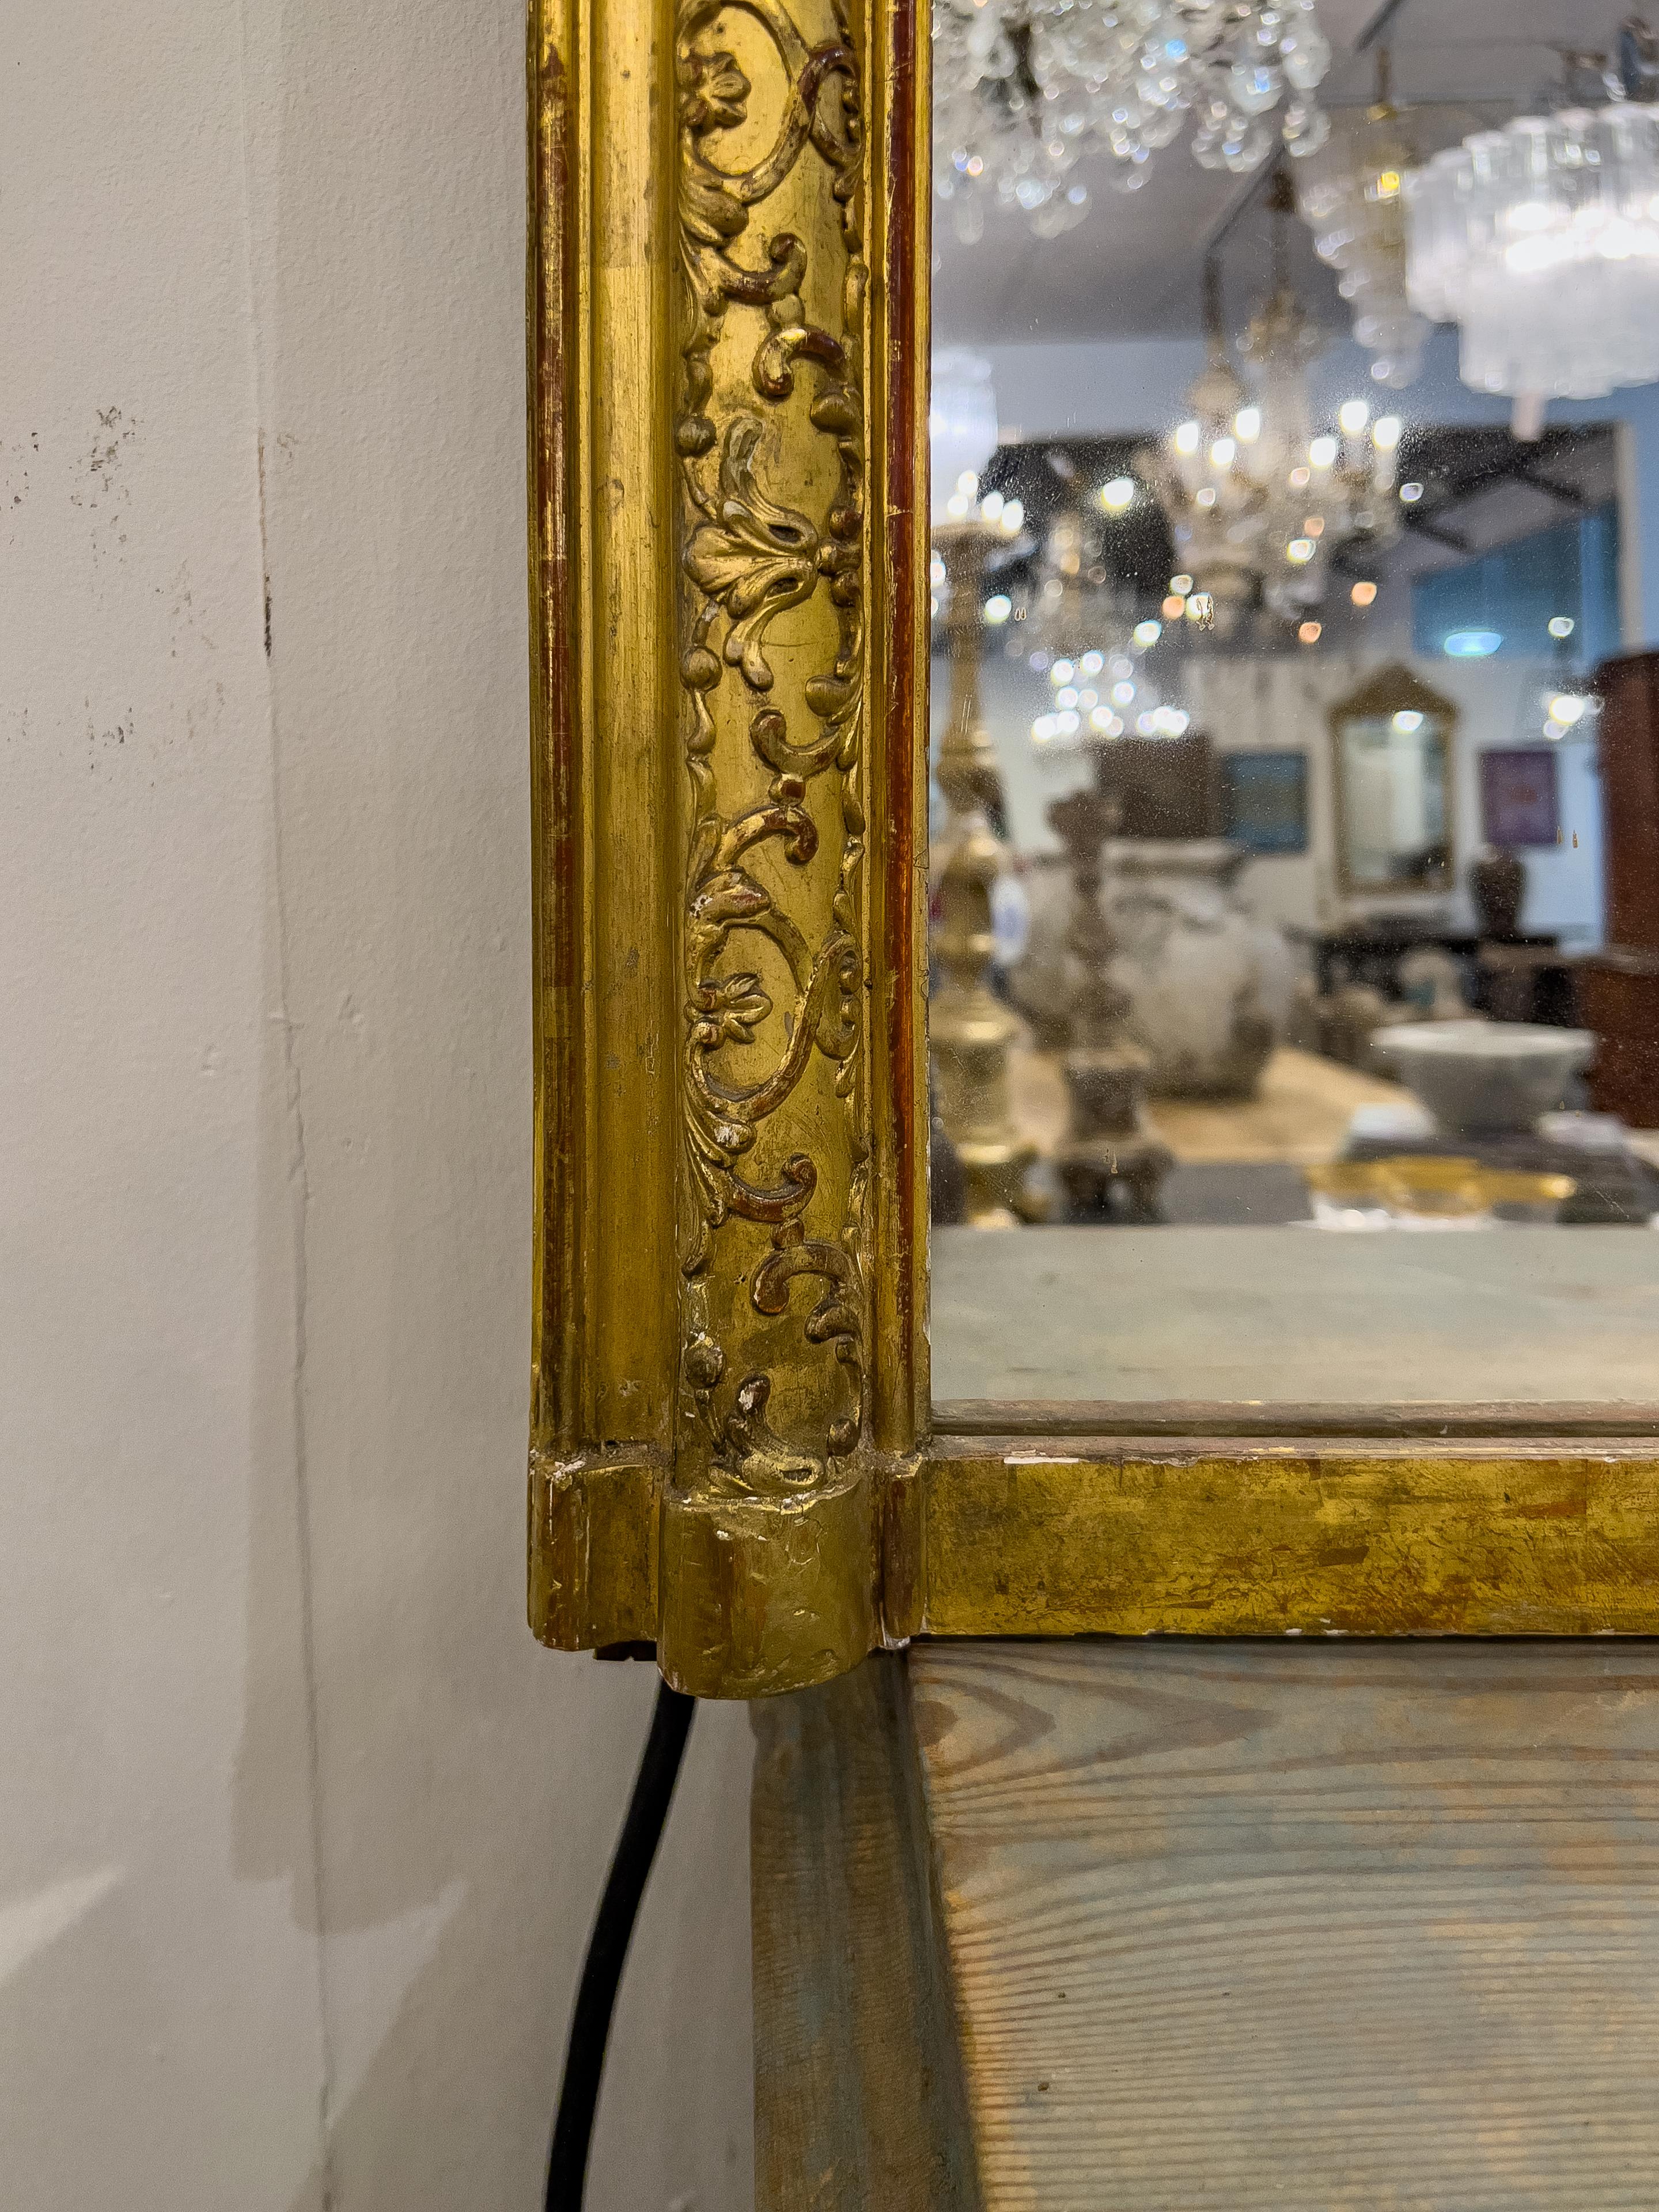 A 19th century Gilt Mirror is an exquisite decorative mirror that showcases the opulence and craftsmanship of the era. It features a gilded frame, meaning it is adorned with a thin layer of gold leaf or gold paint, creating a luxurious and radiant